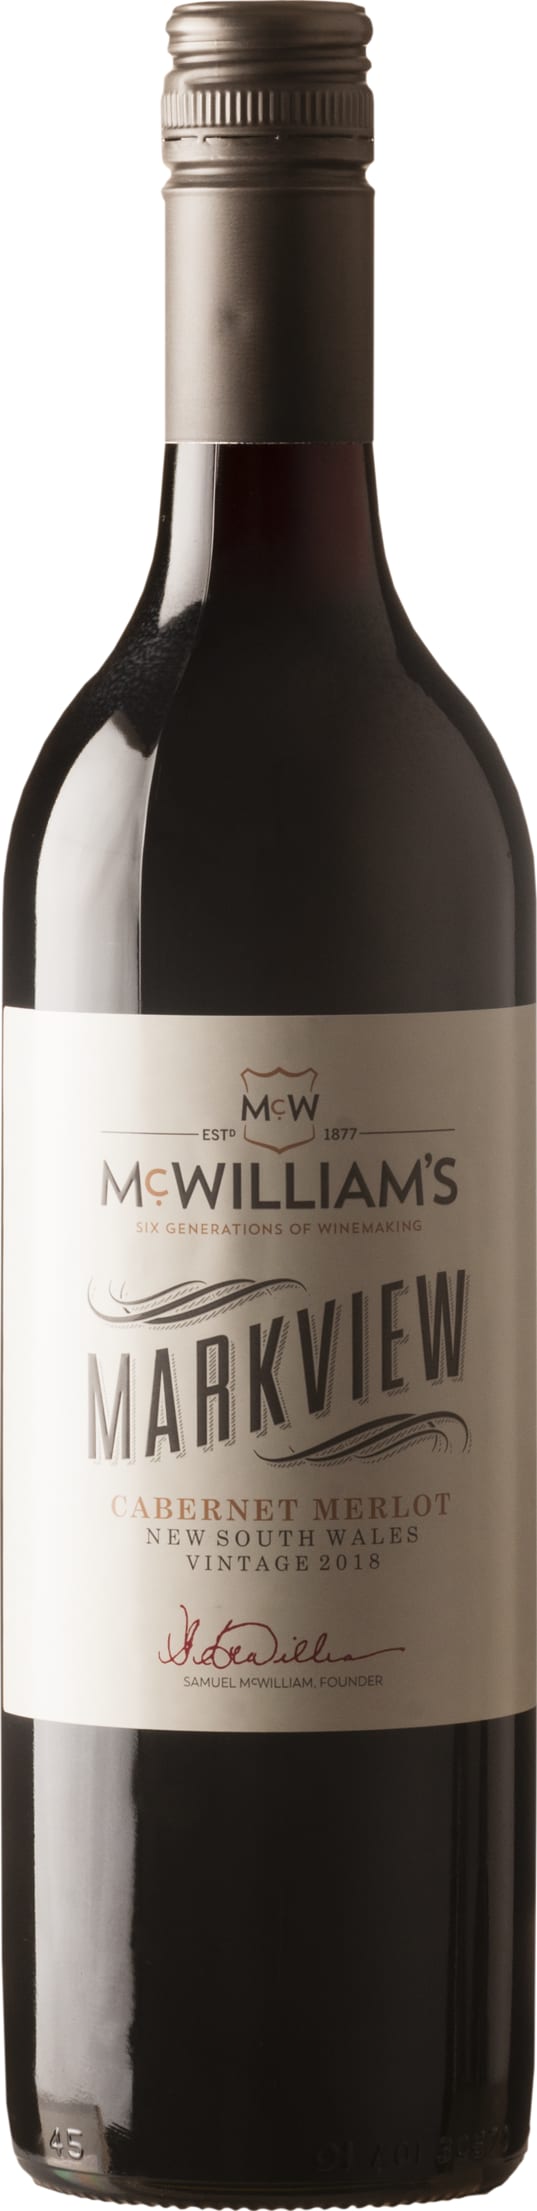 McWilliams Markview Shiraz 75cl NV - Buy McWilliams Wines from GREAT WINES DIRECT wine shop